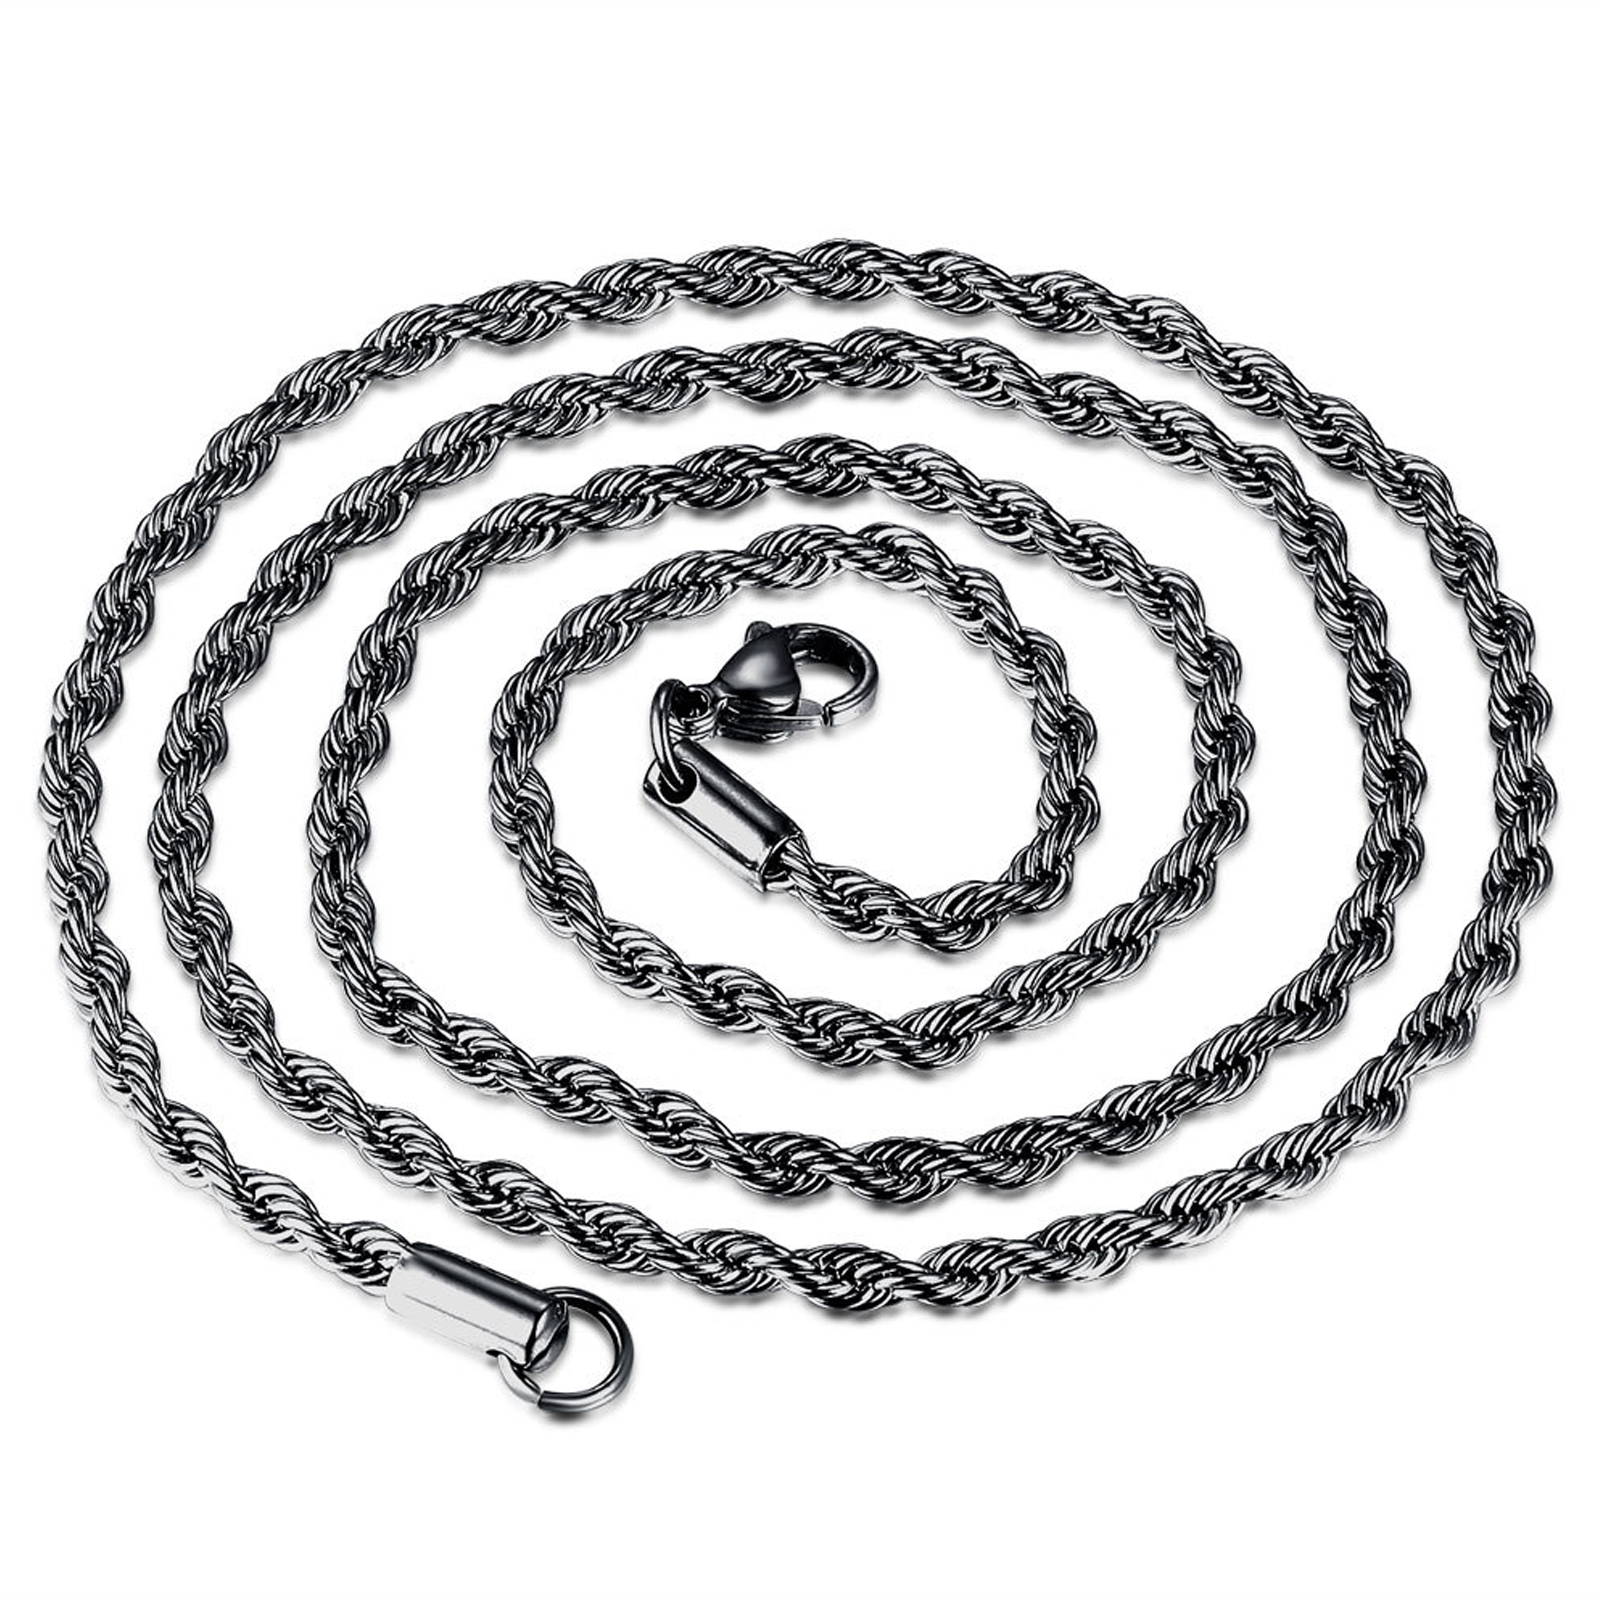 Picture of Stainless Steel Braided Rope Chain Necklace Gunmetal 61cm(24") long, 1 Piece